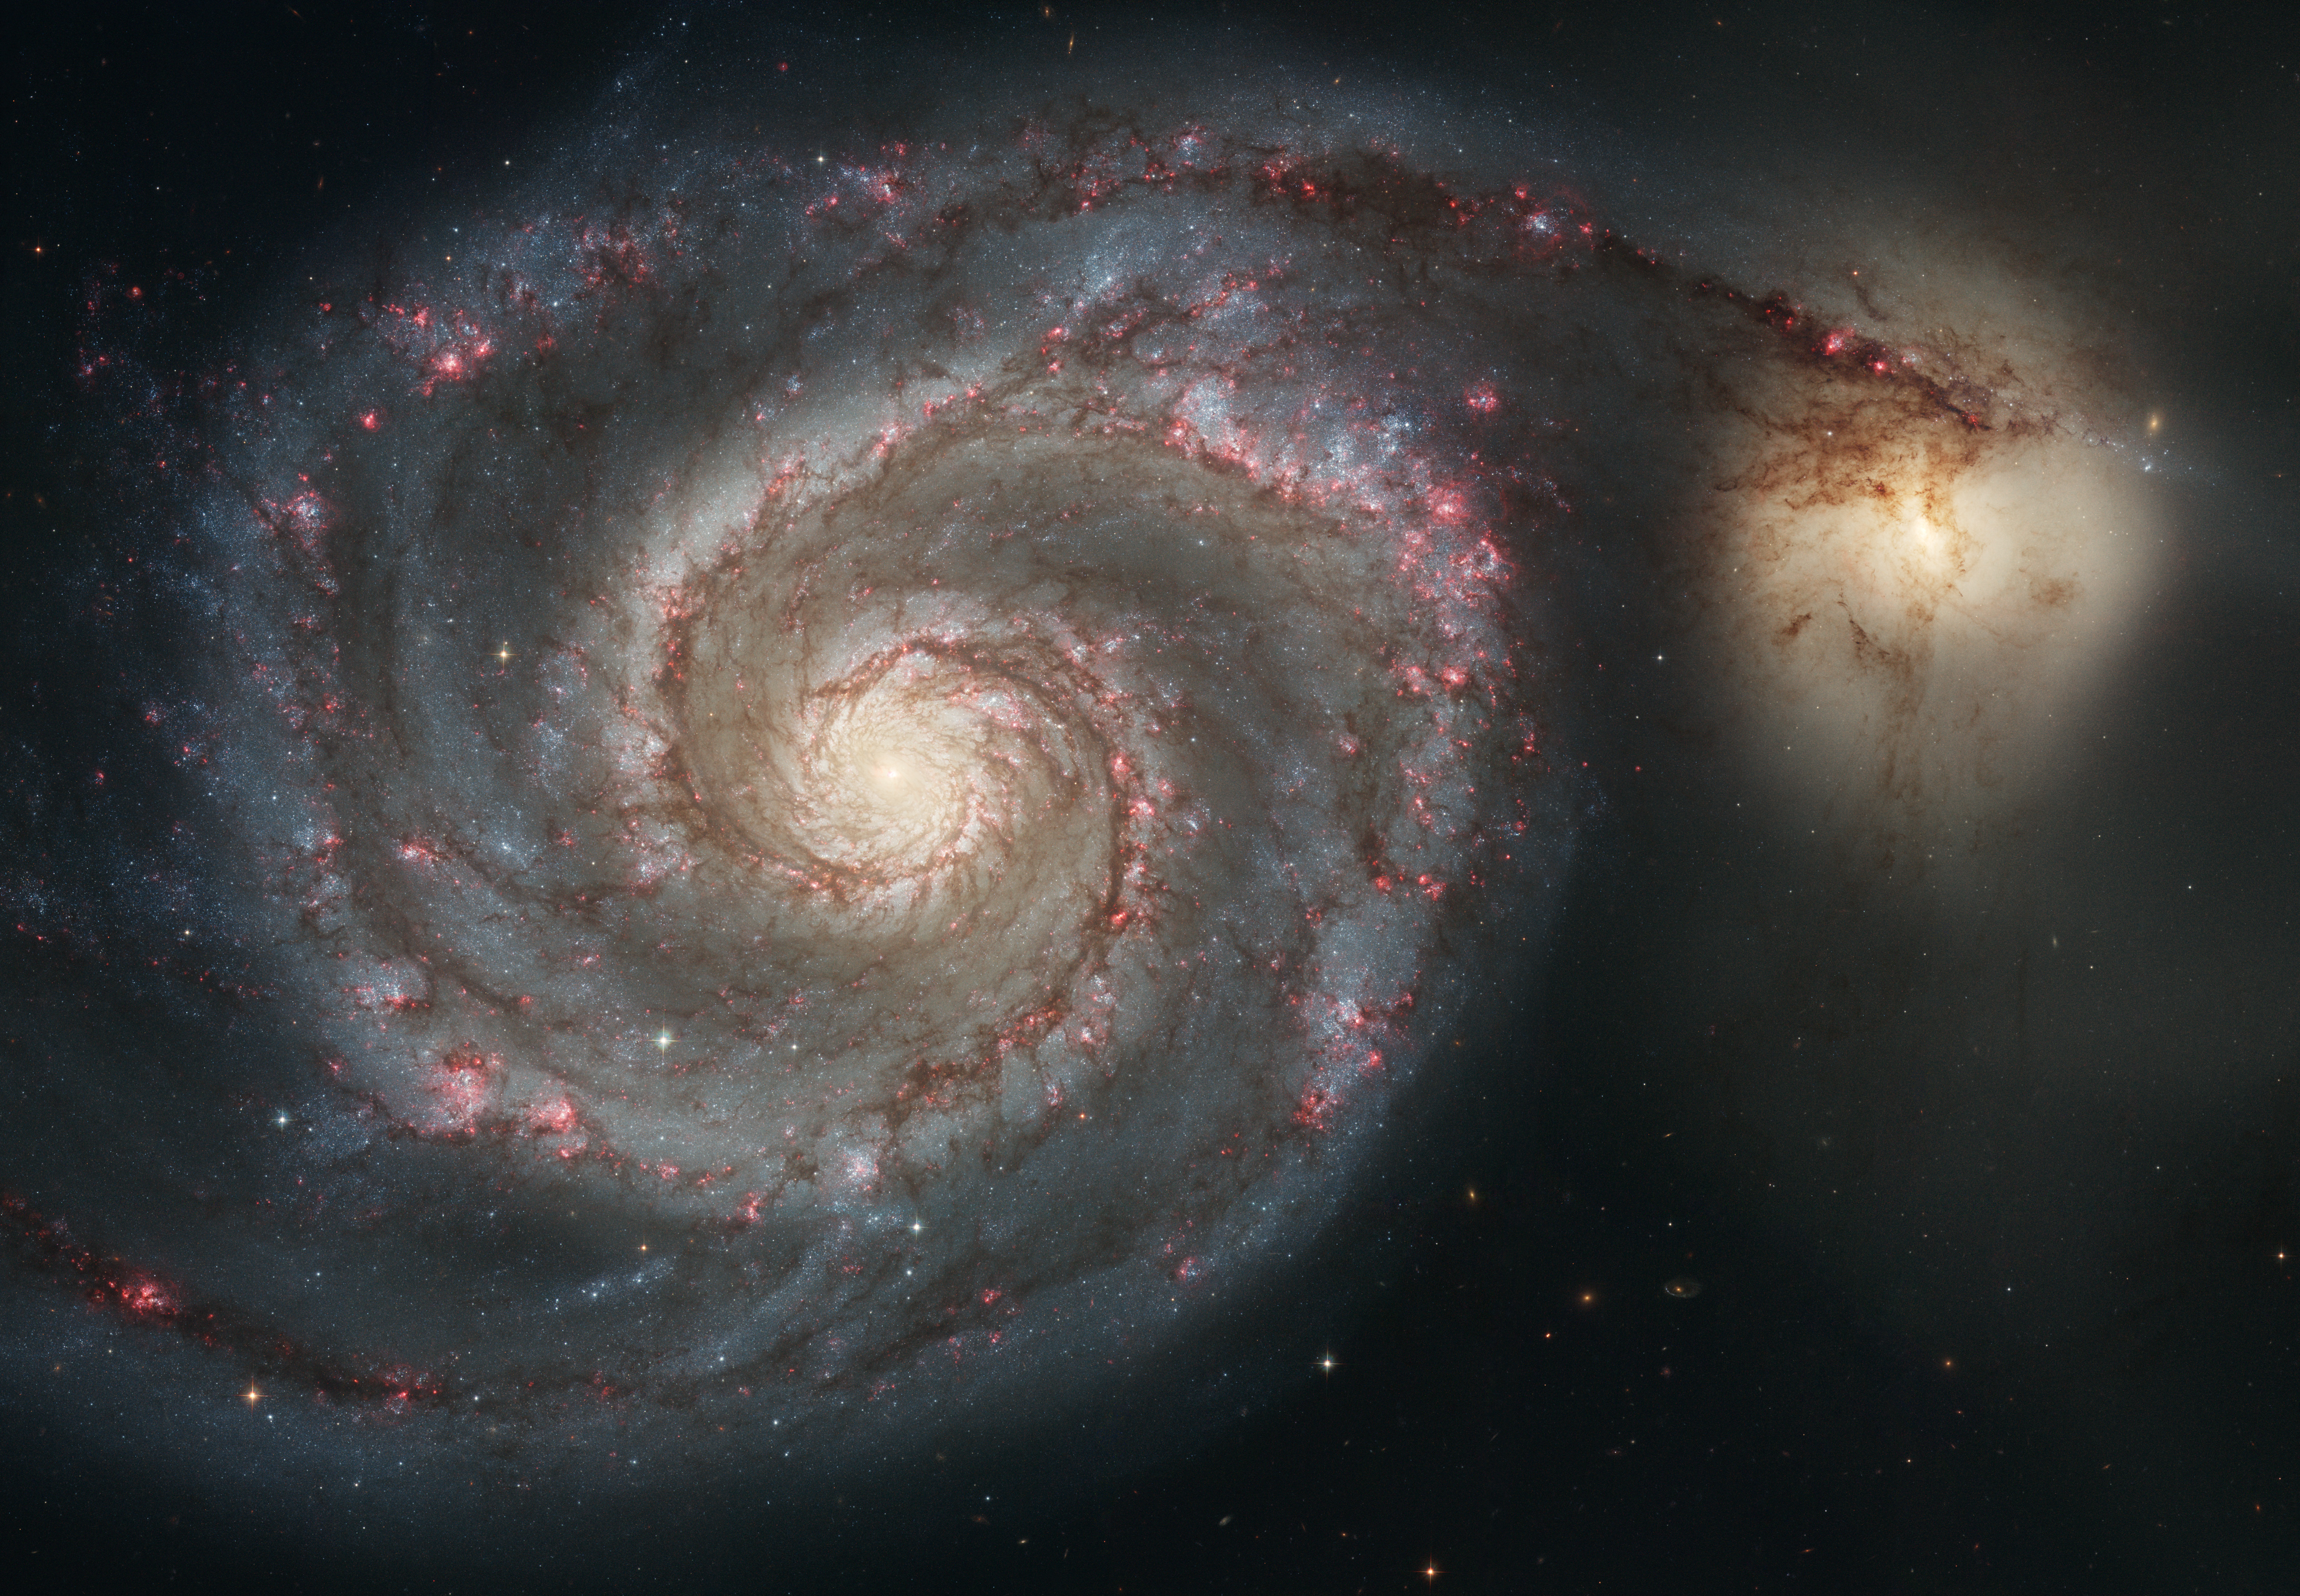 outer space, stars, galaxies, planets, Whirlpool galaxy - desktop wallpaper